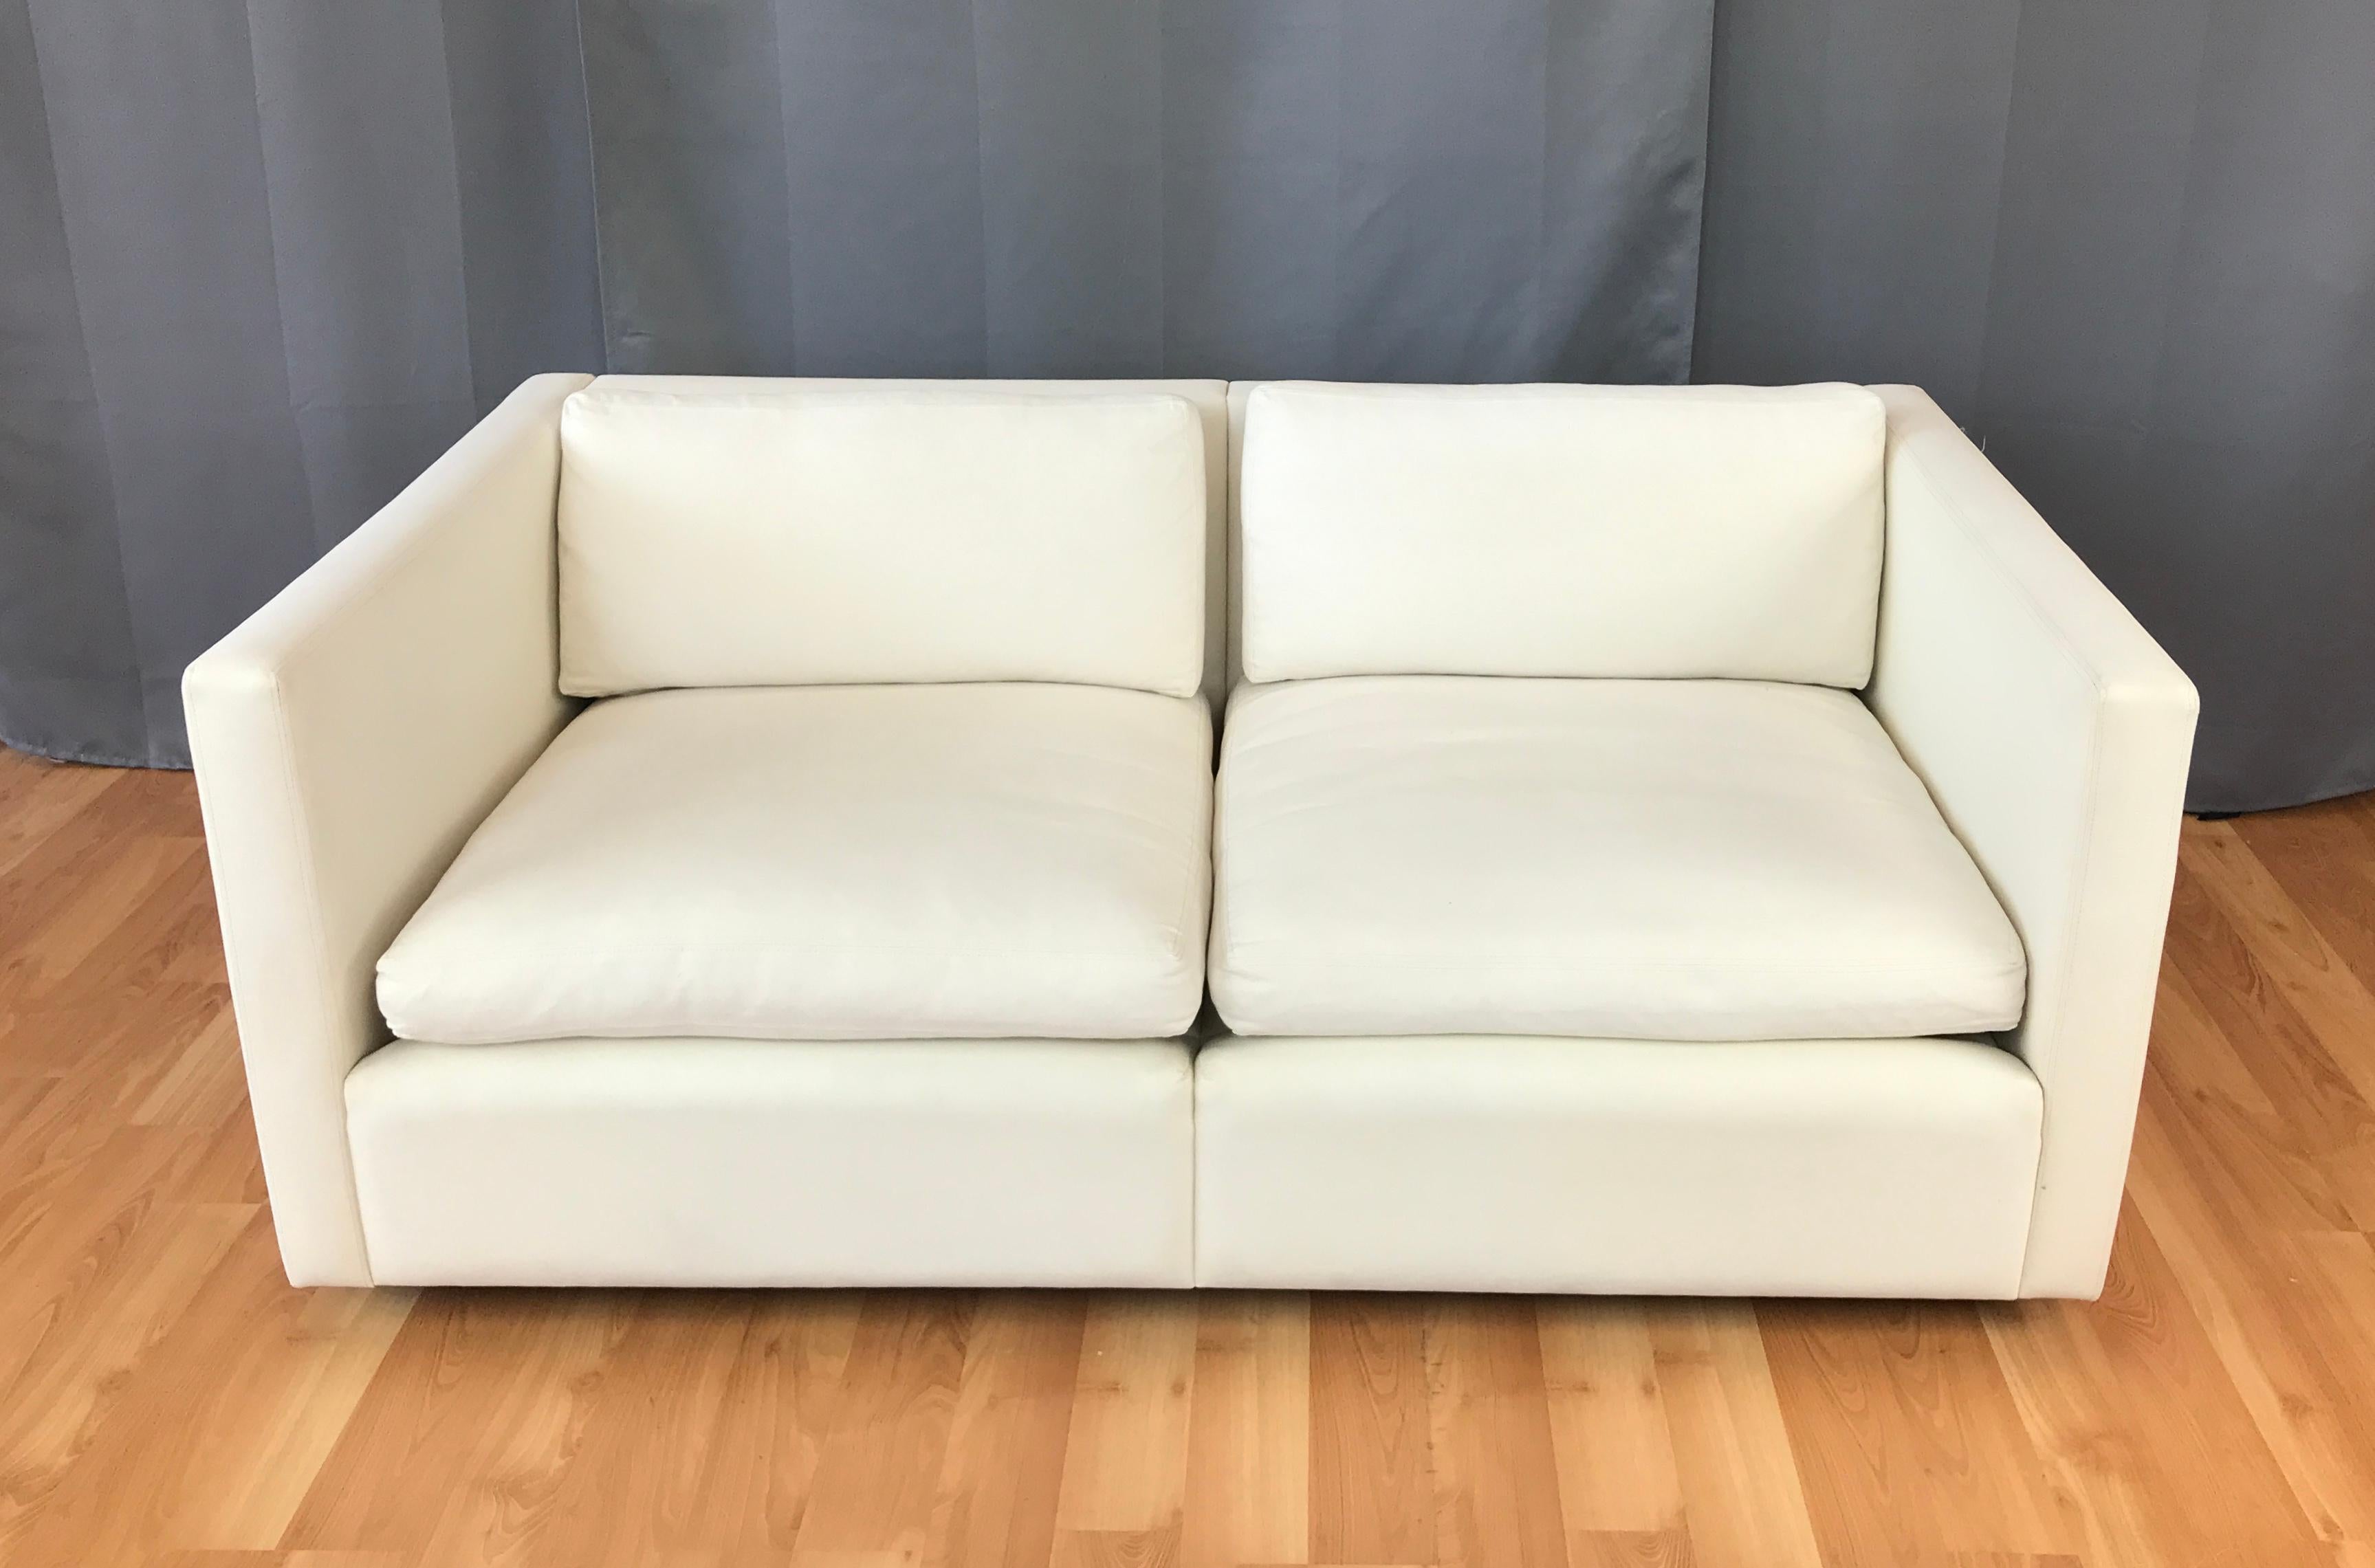 A crisply styled off-white model 1052C settee or loveseat designed by Charles Pfister for Knoll in 1971, and produced around 2009.

Perfectly proportioned and quite comfortable, with a very clean, contemporary aesthetic. Original Knoll cotton canvas